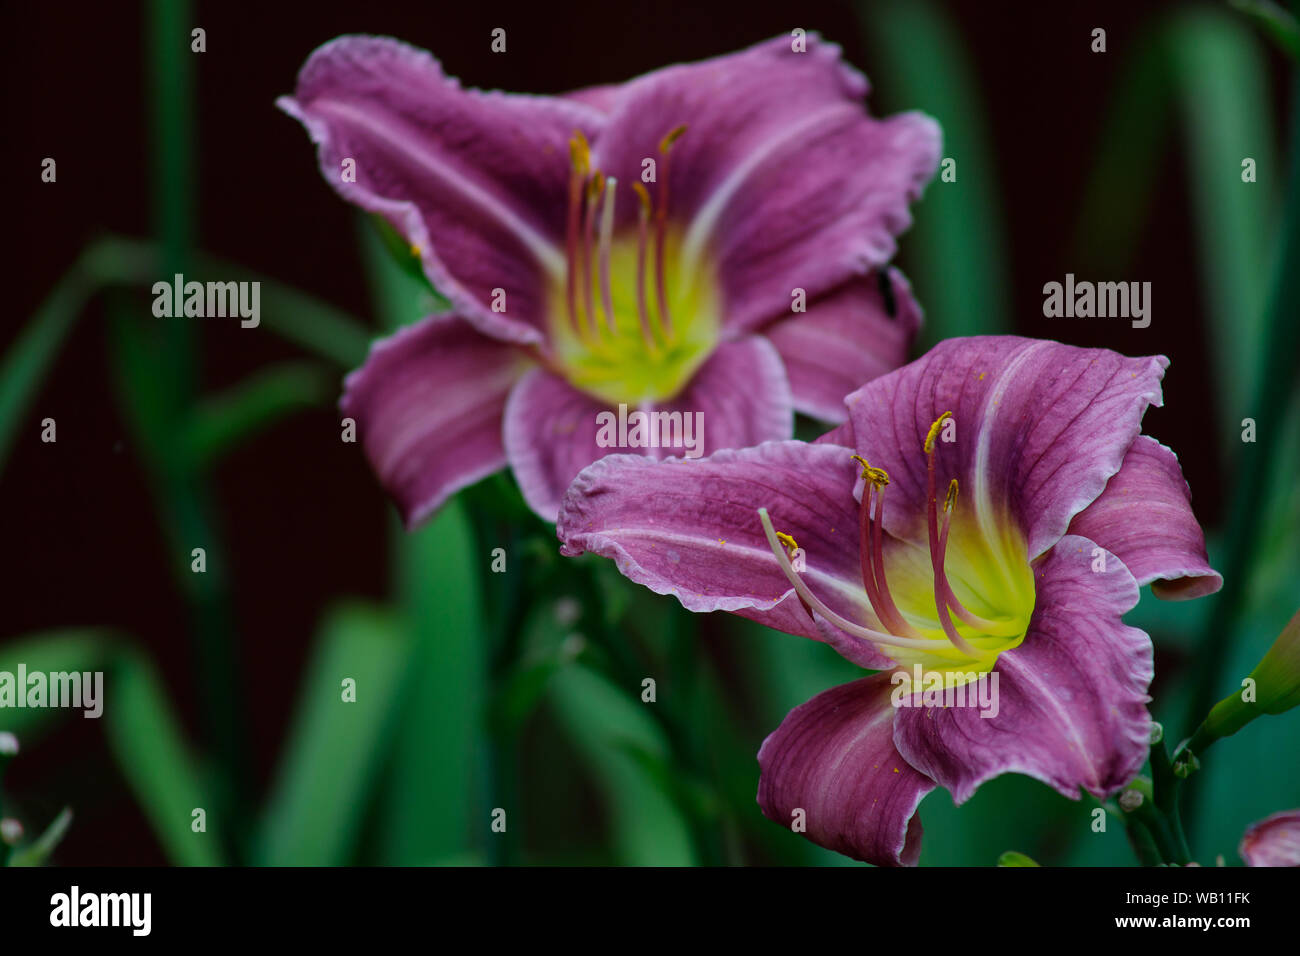 Purple lily or hemerocallis flowers in the garden. Flowers bloom in summer. Tongue flower coquetry. Stock Photo